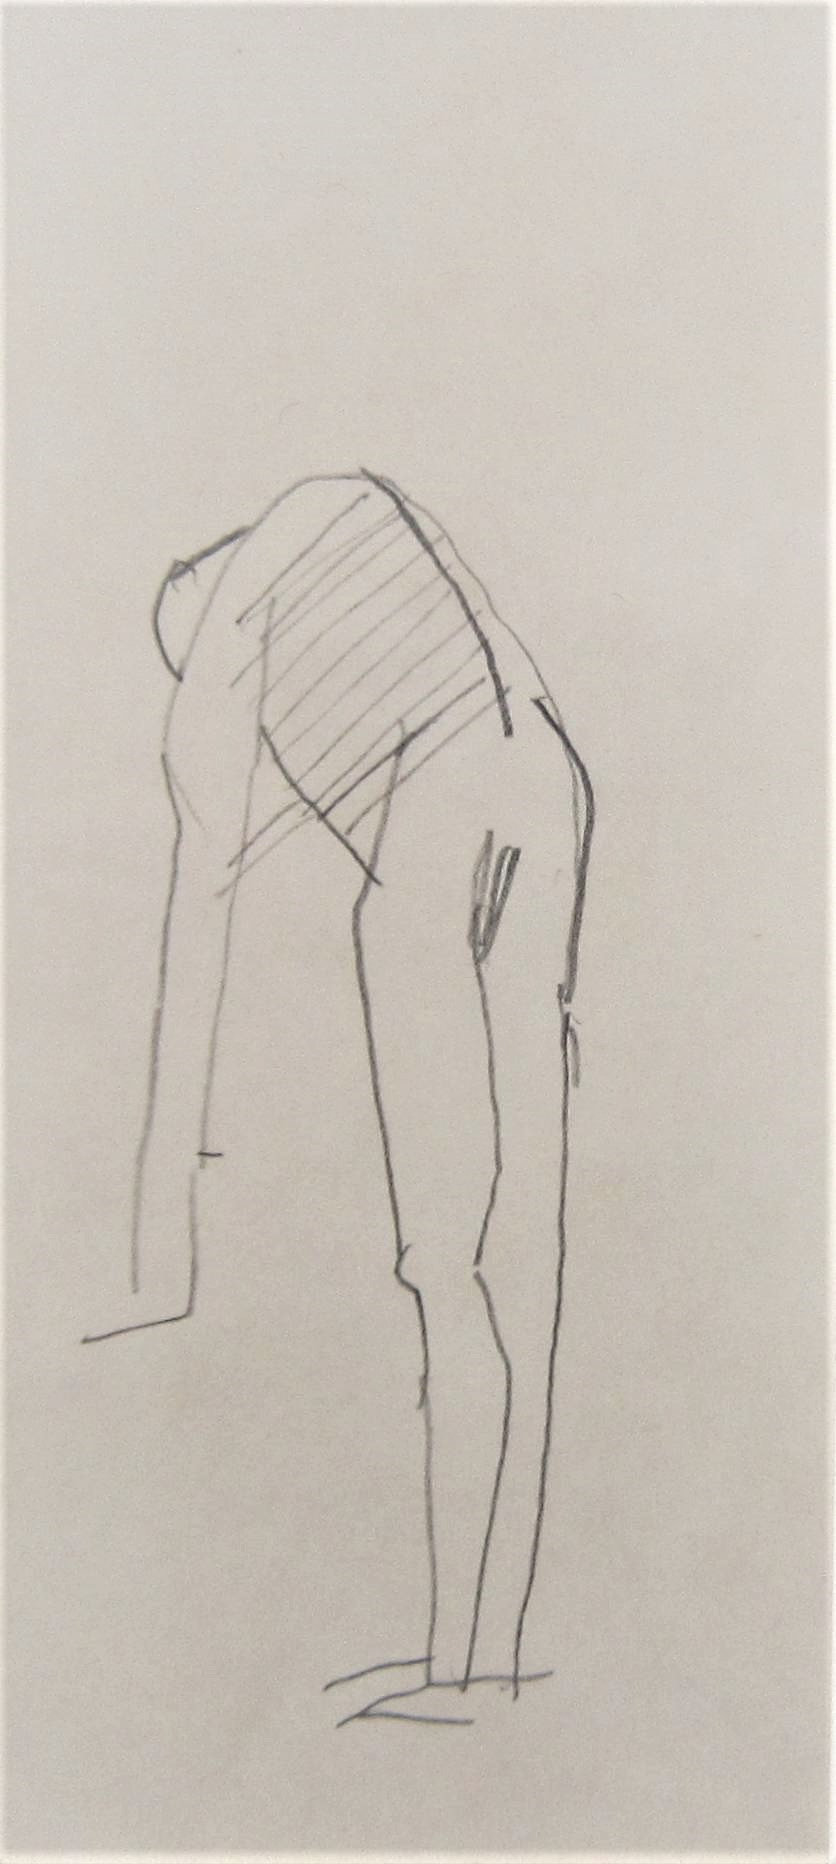 KEITH VAUGHAN [1912-77]. Bending Figure. pencil drawing. 14 x 7 cm - overall including frame 25 x 16